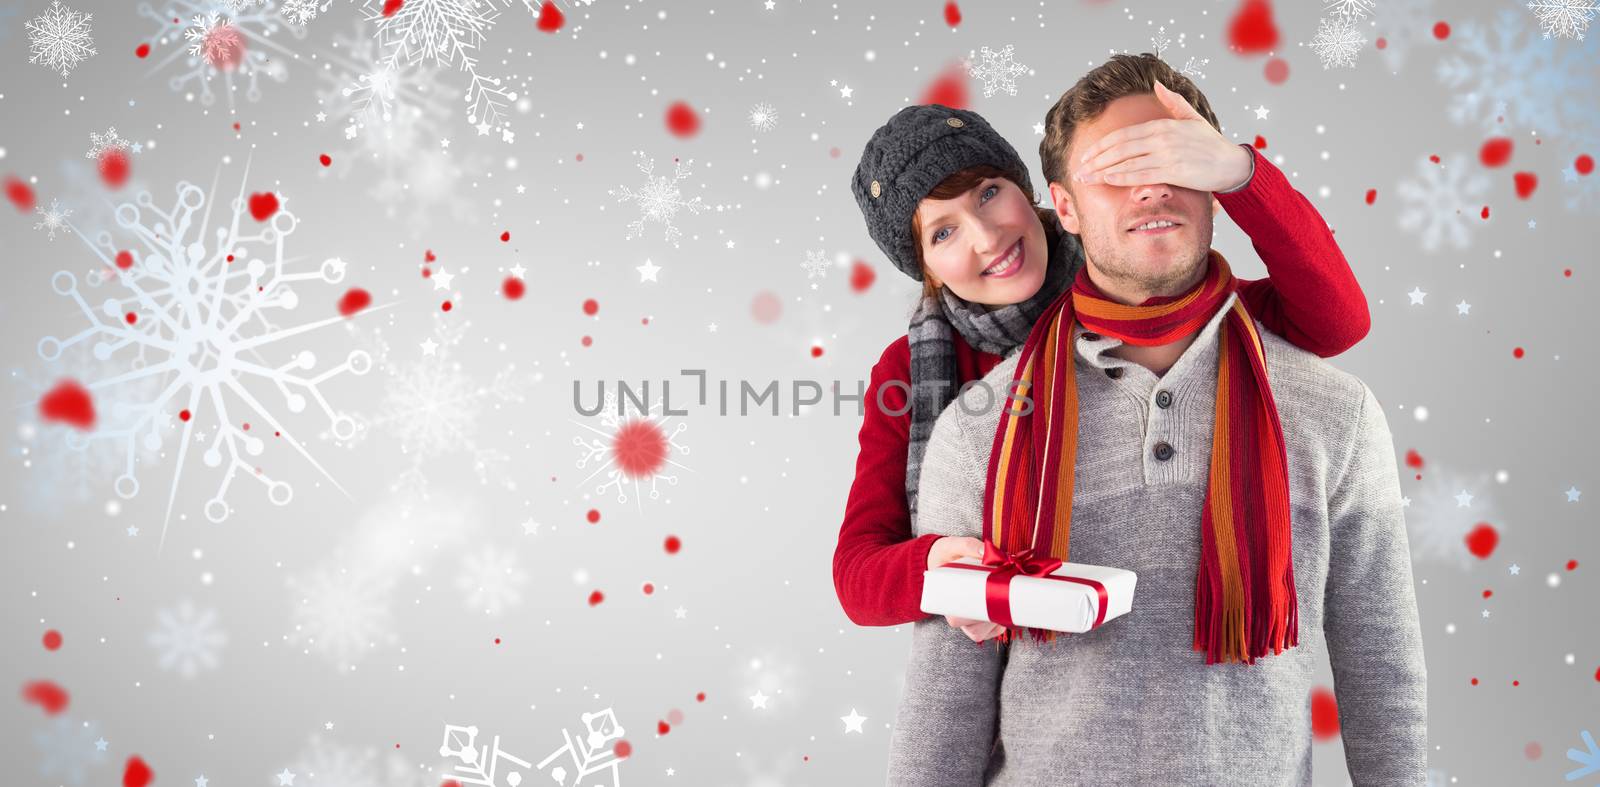 Woman giving man a present against snowflake pattern